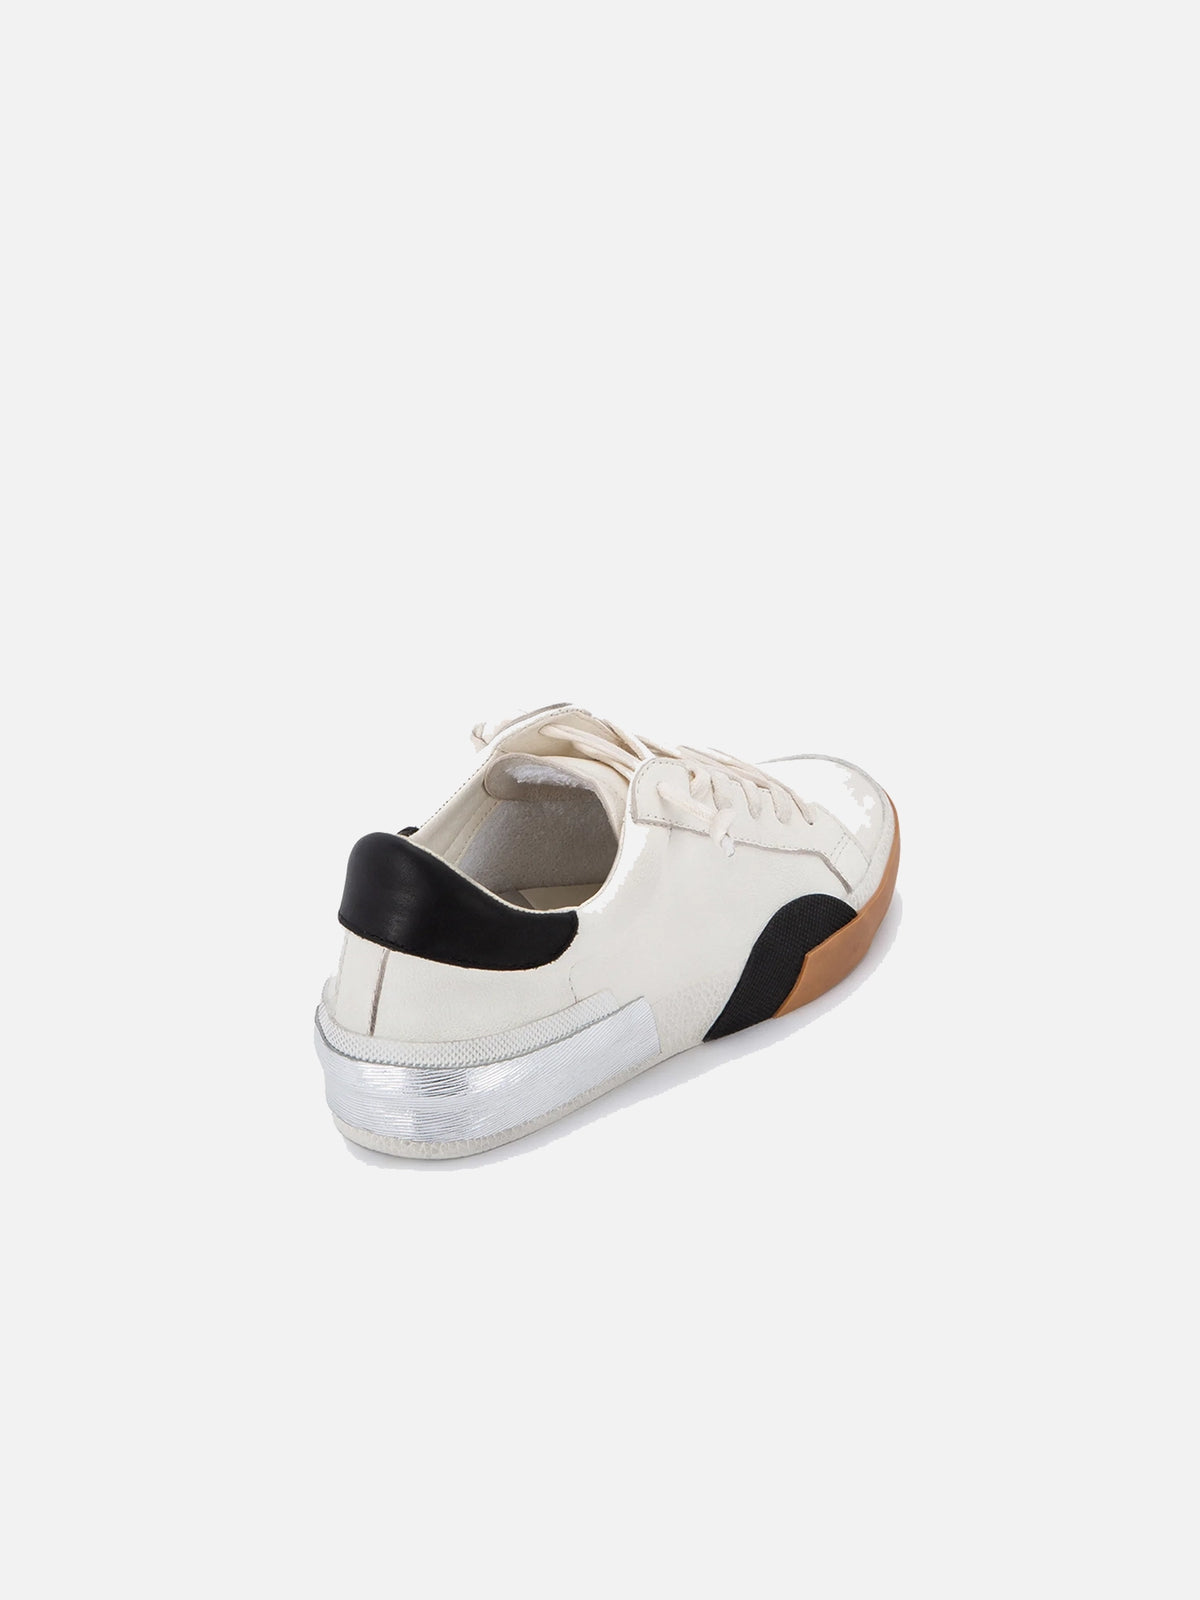 dolce vita zina colorblock sneakers in black and white leather